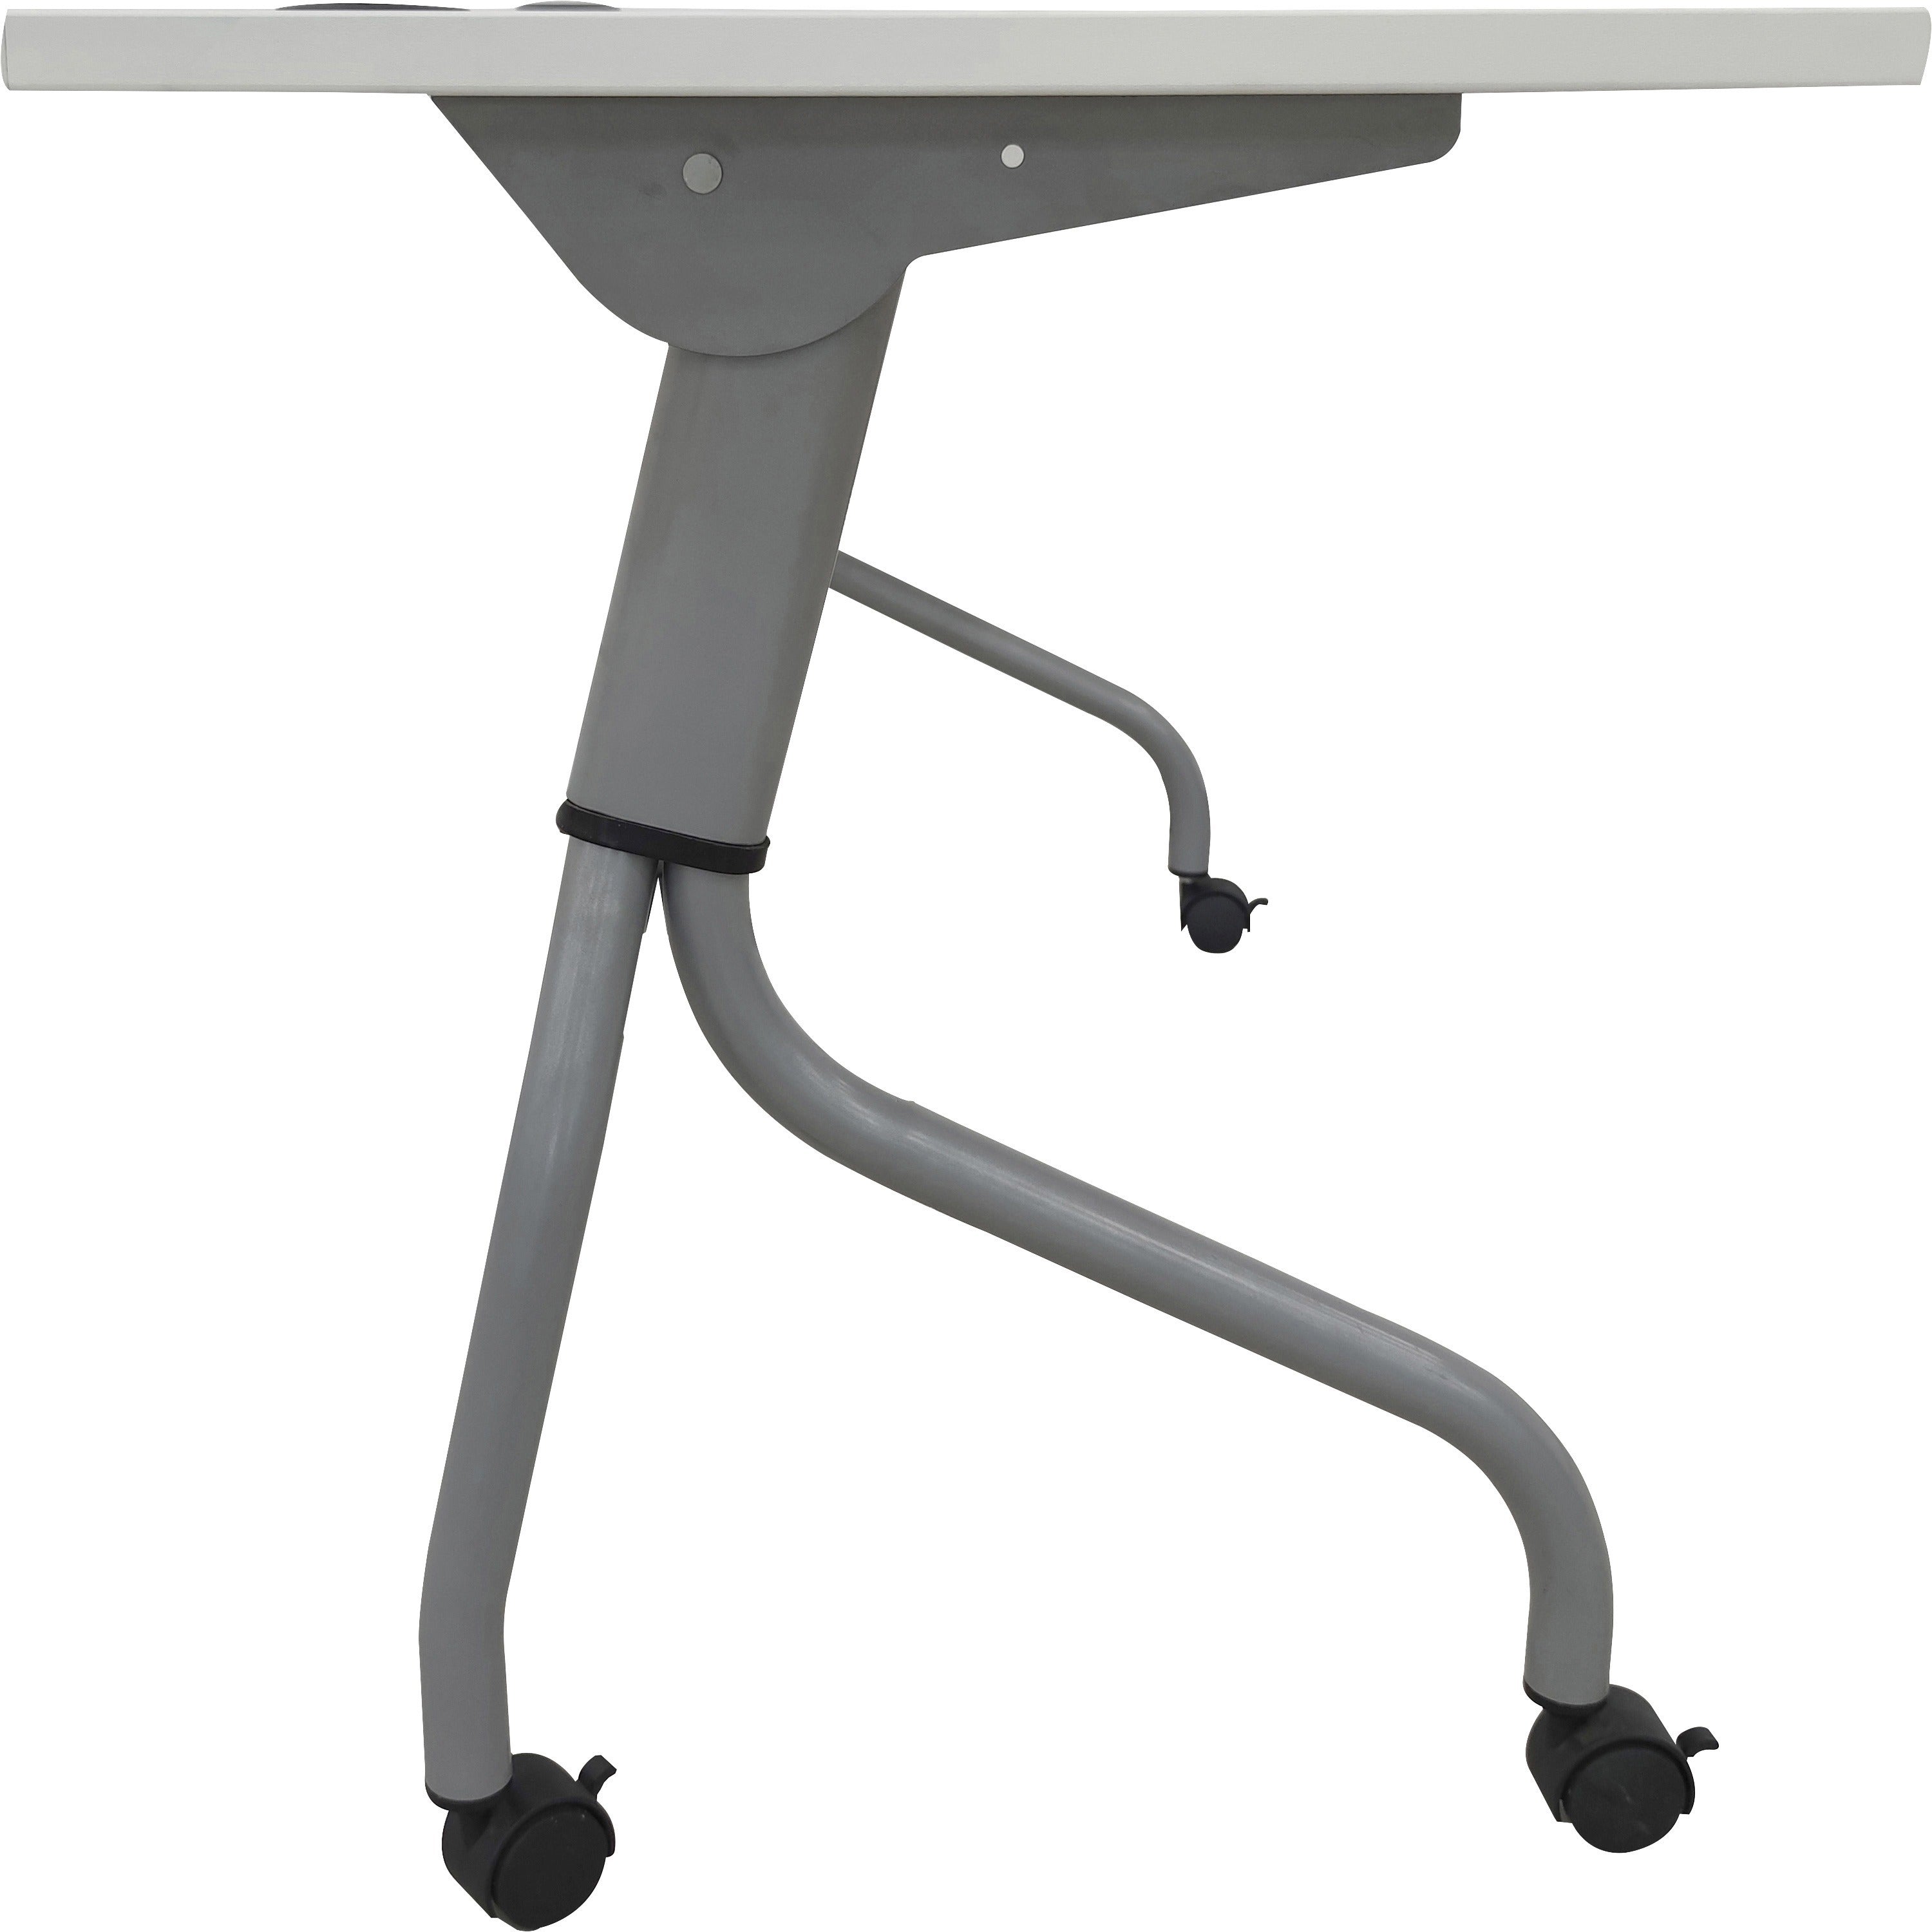 lorell-flip-top-training-table-for-table-topwhite-rectangle-top-silver-folding-base-4-legs-2360-table-top-length-x-48-table-top-width-2950-height-assembly-required-1-each_llr60745 - 5